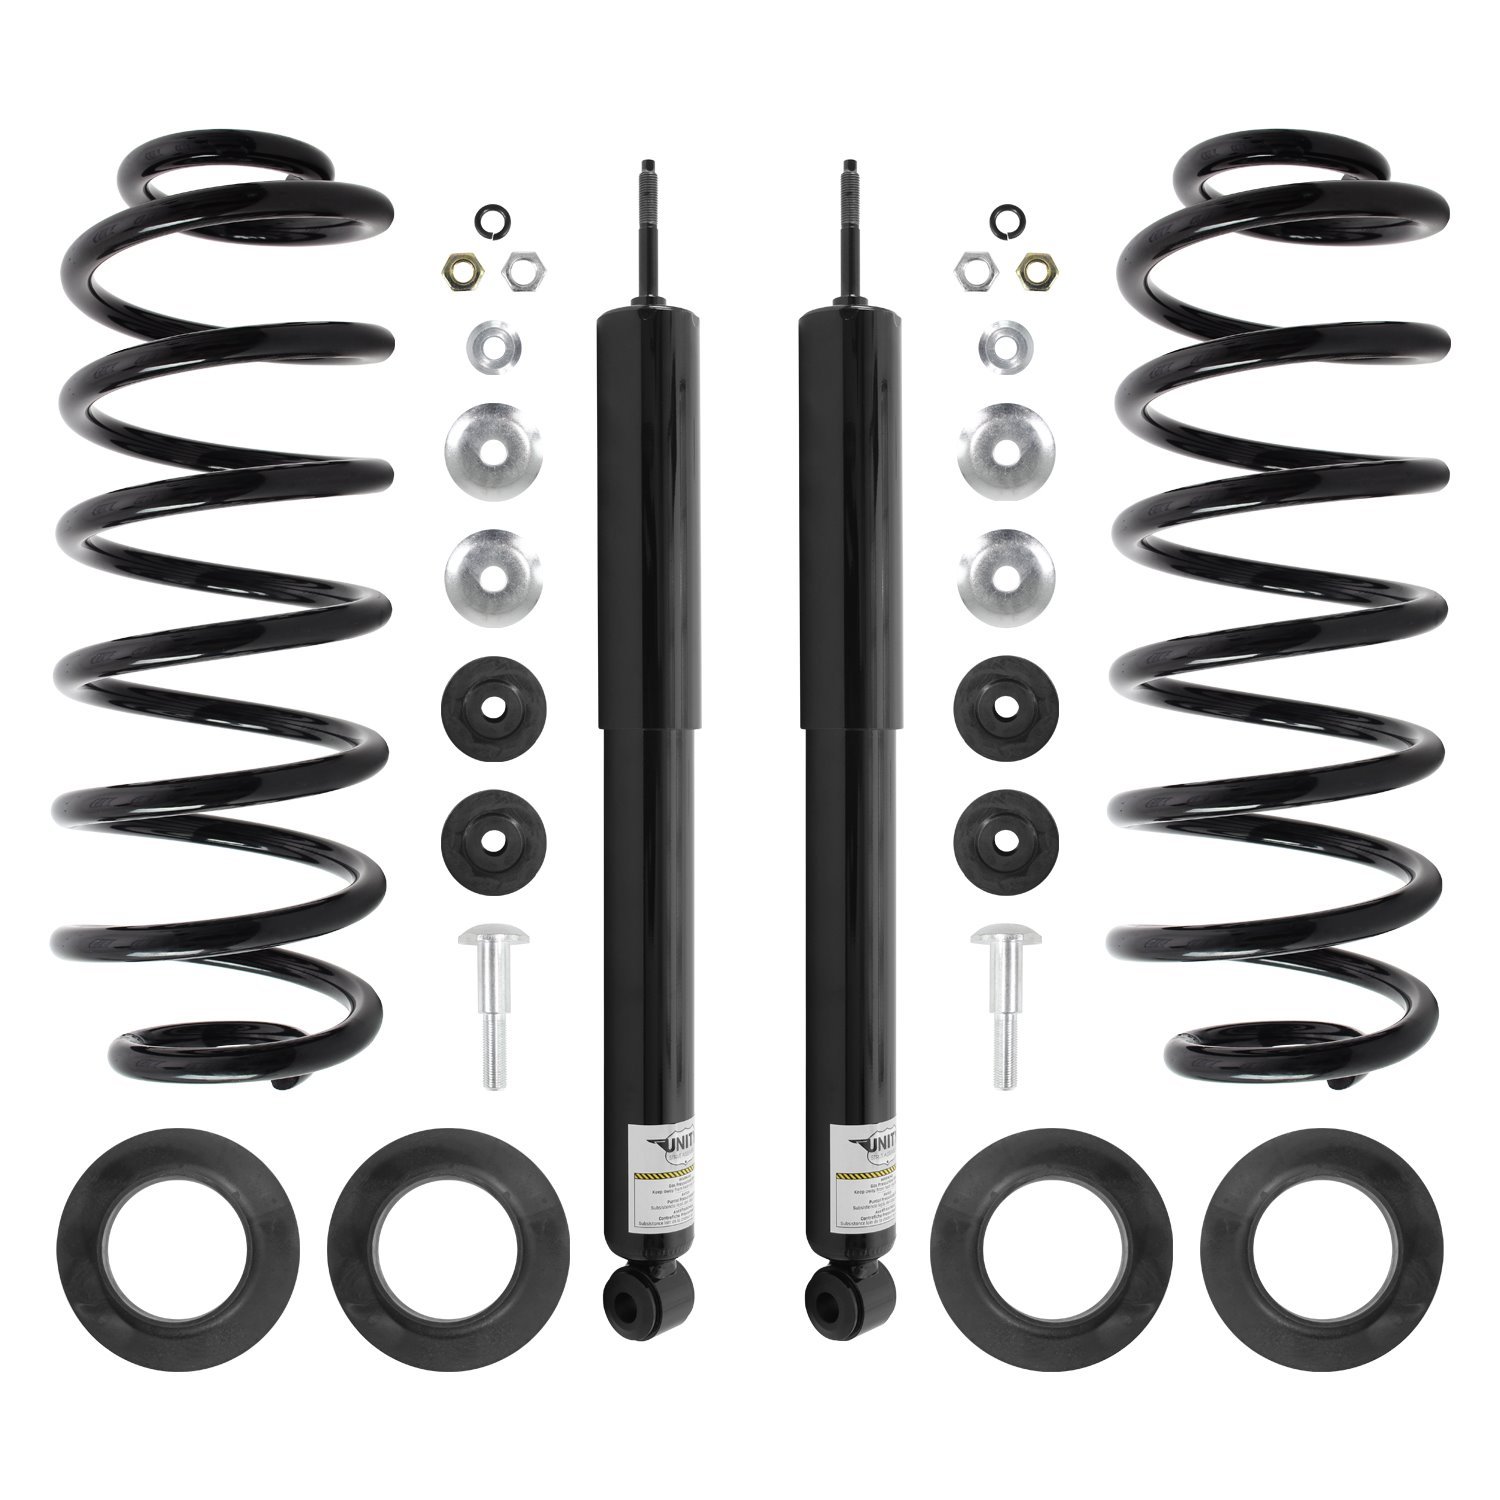 65003c Air Spring To Coil Spring Conversion Kit Fits Select Ford Crown Victoria, Lincoln Town Car, Mercury Grand Marquis